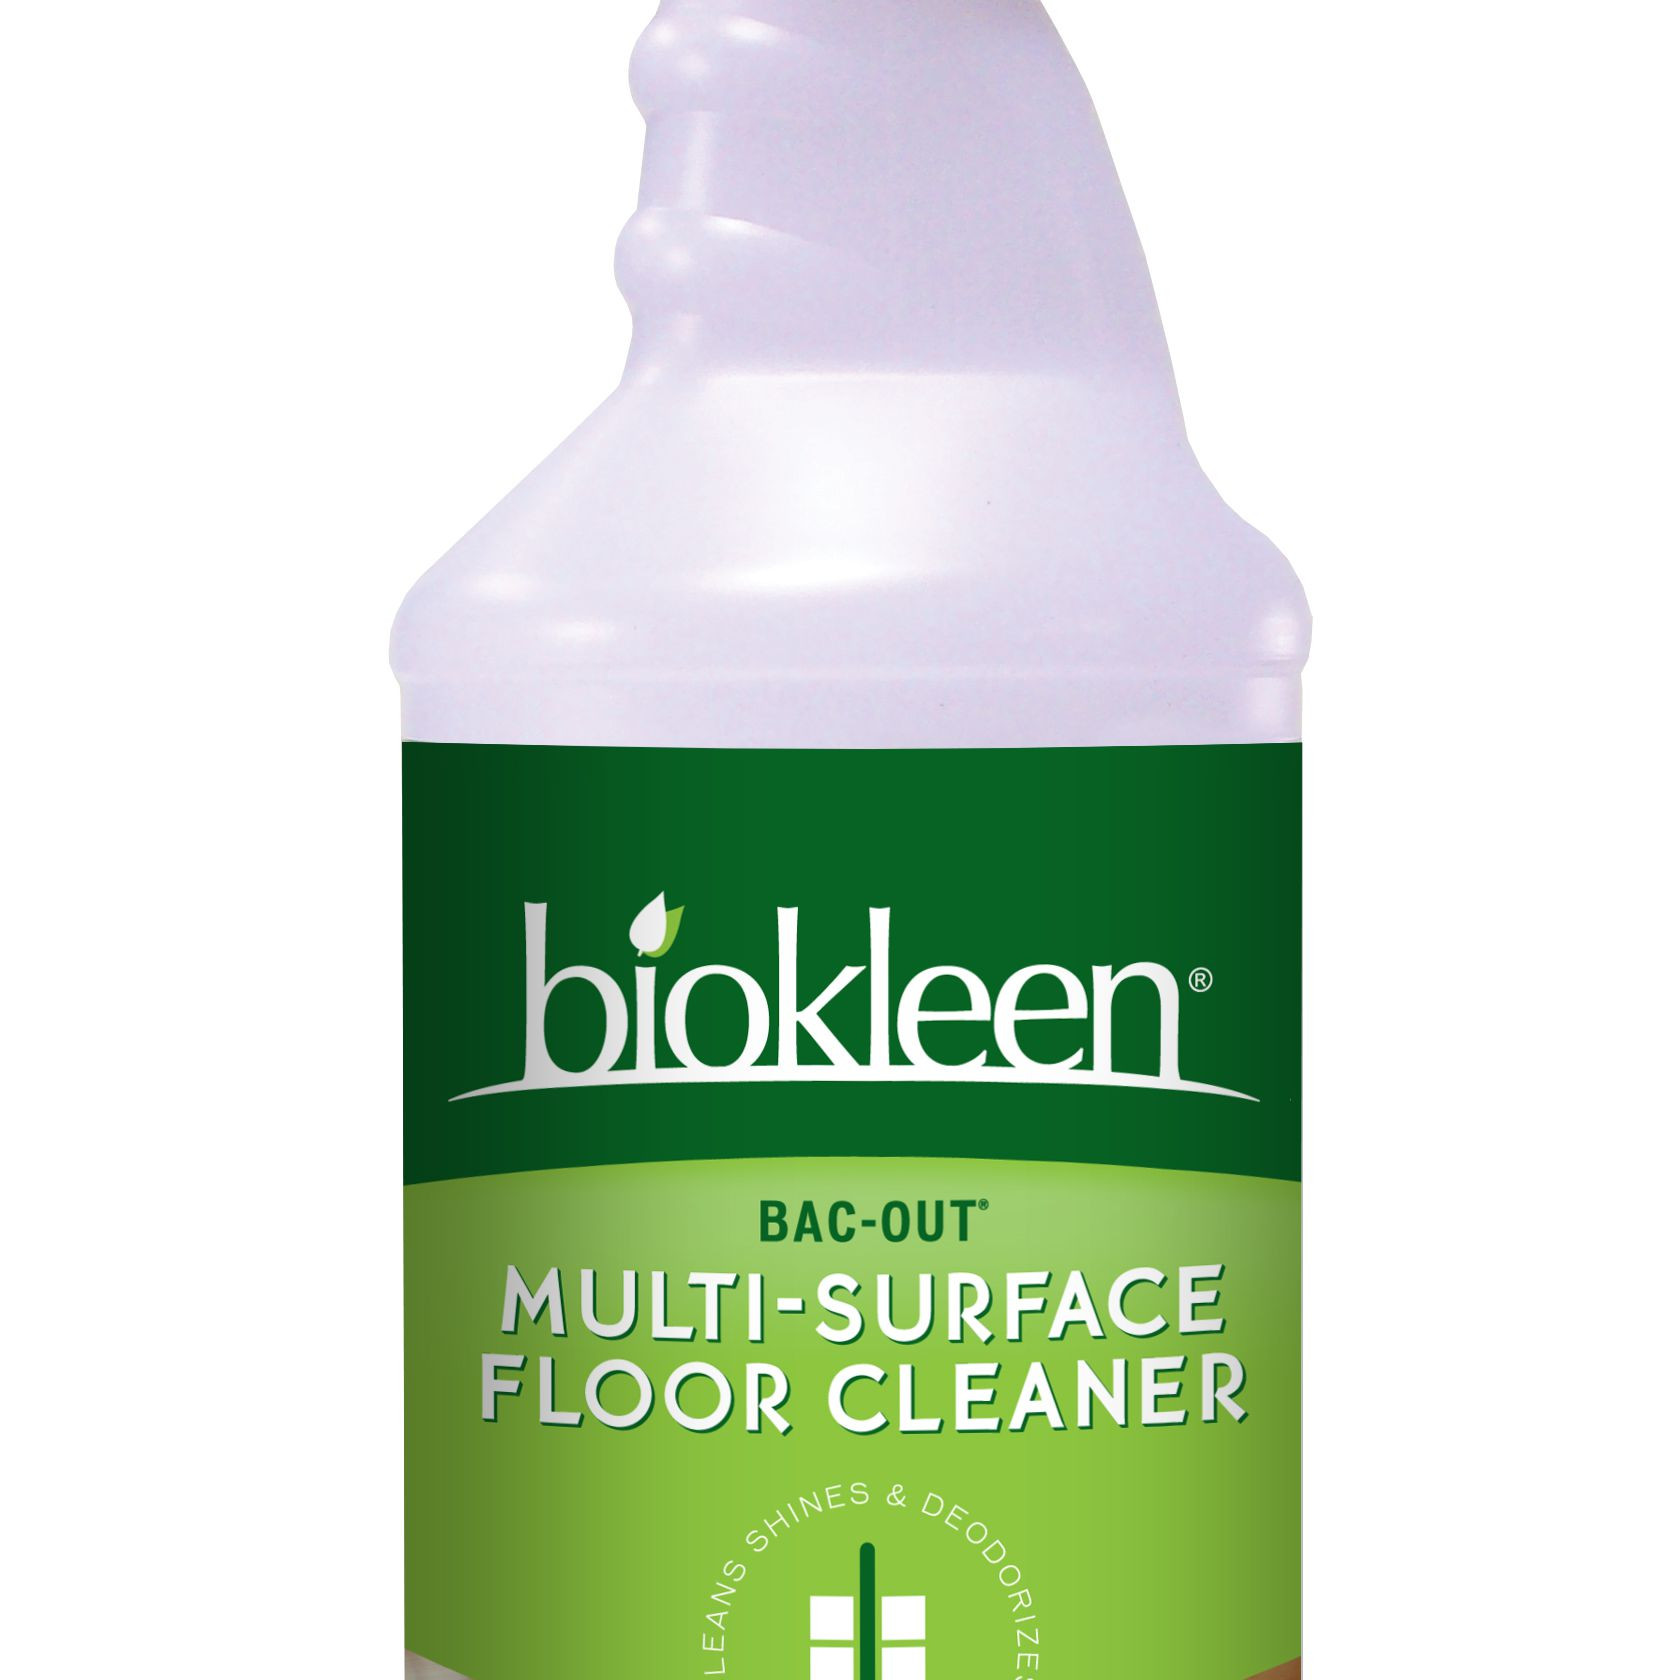 simple solutions hardwood floor cleaner of adore your wood floors with these eco friendly cleaners with biokleen bac out multi surface floor cleaner